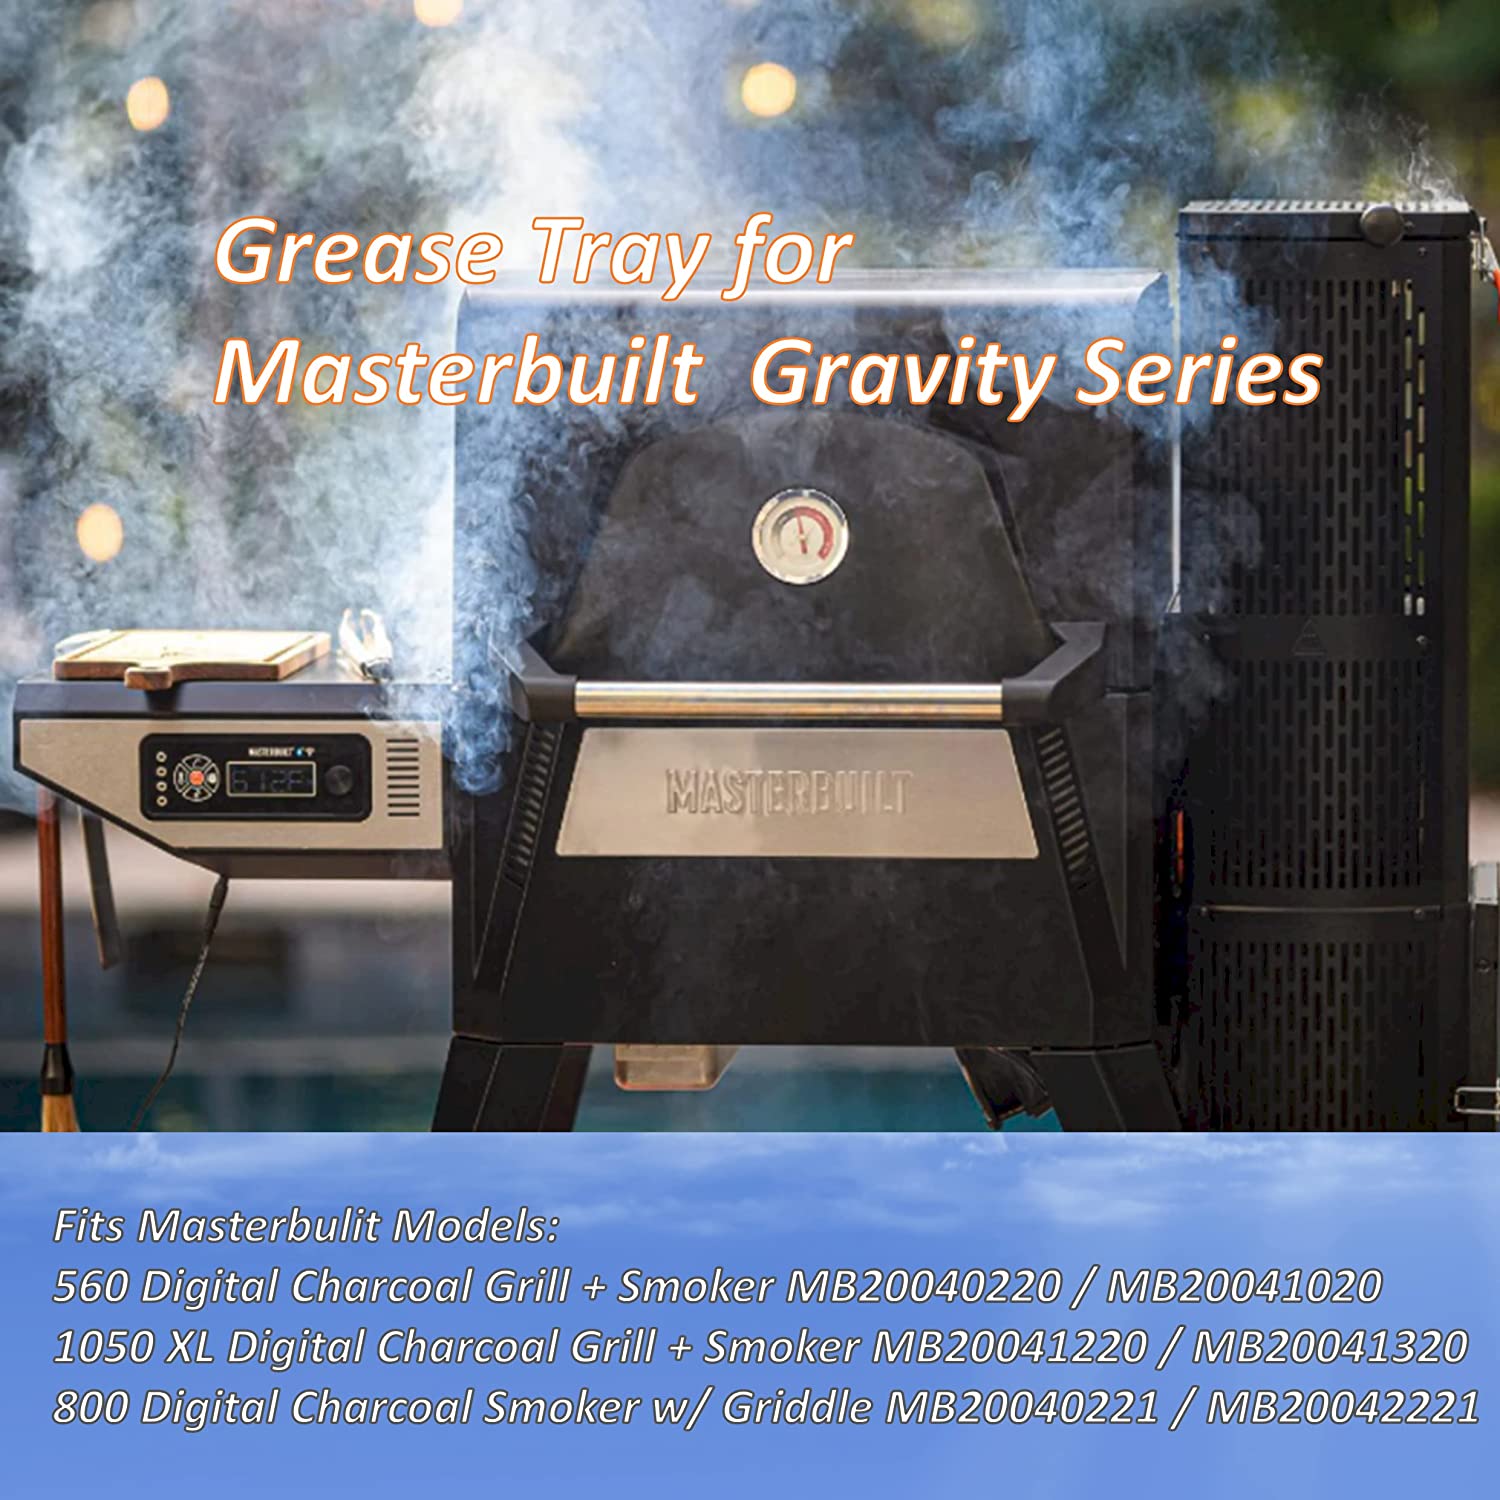 Grease Tray Replacement For Masterbuilt 560/1050XL Gravity Series Digital Charcoal Grill + Smoker